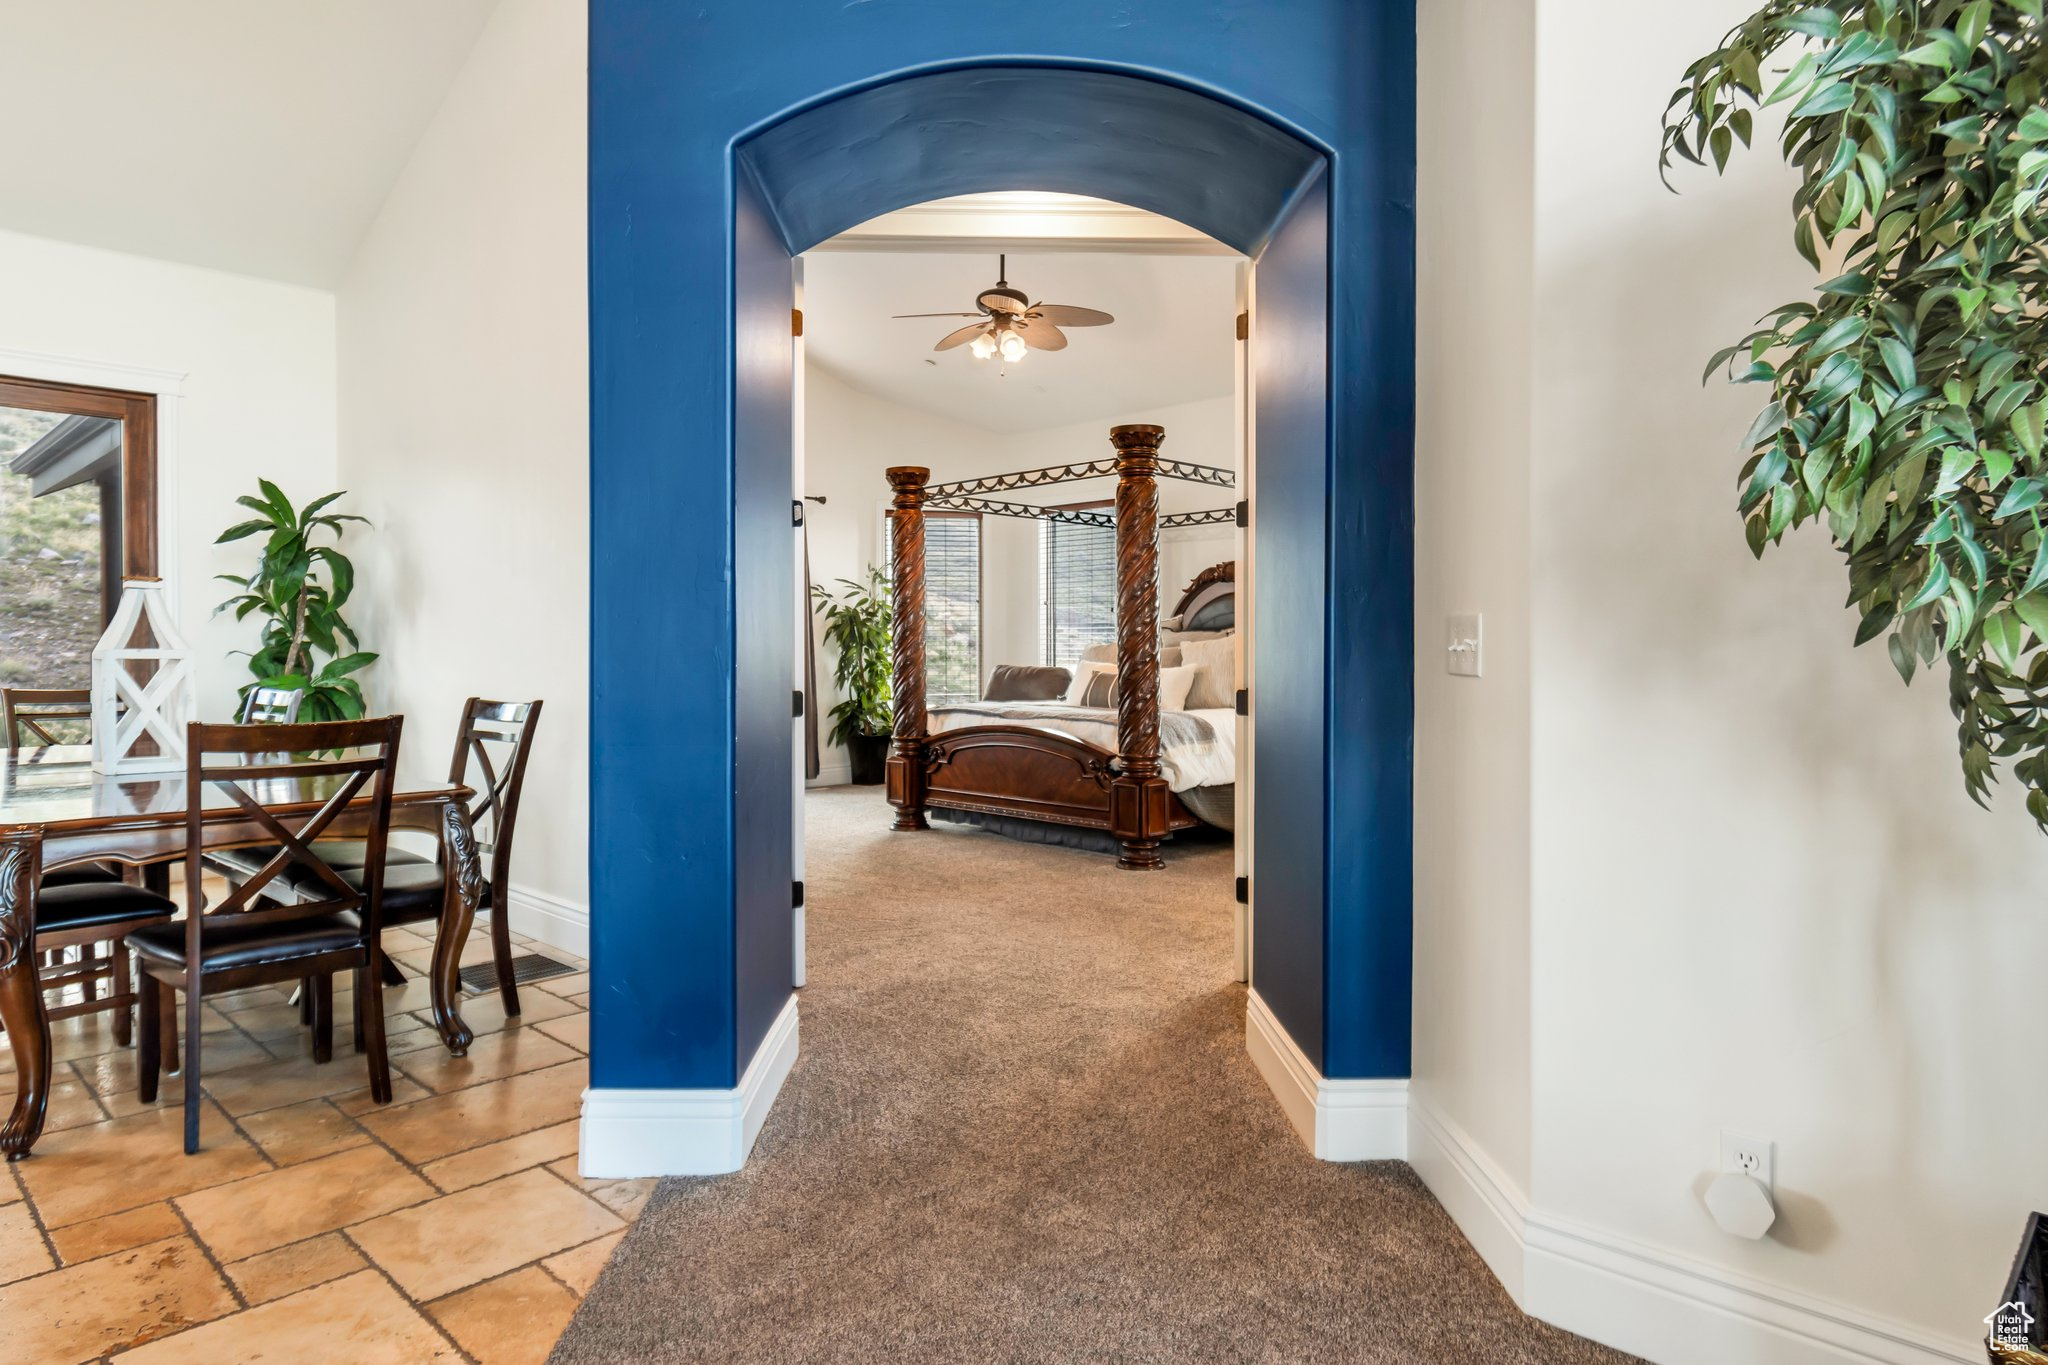 Hallway featuring tile flooring and vaulted ceiling